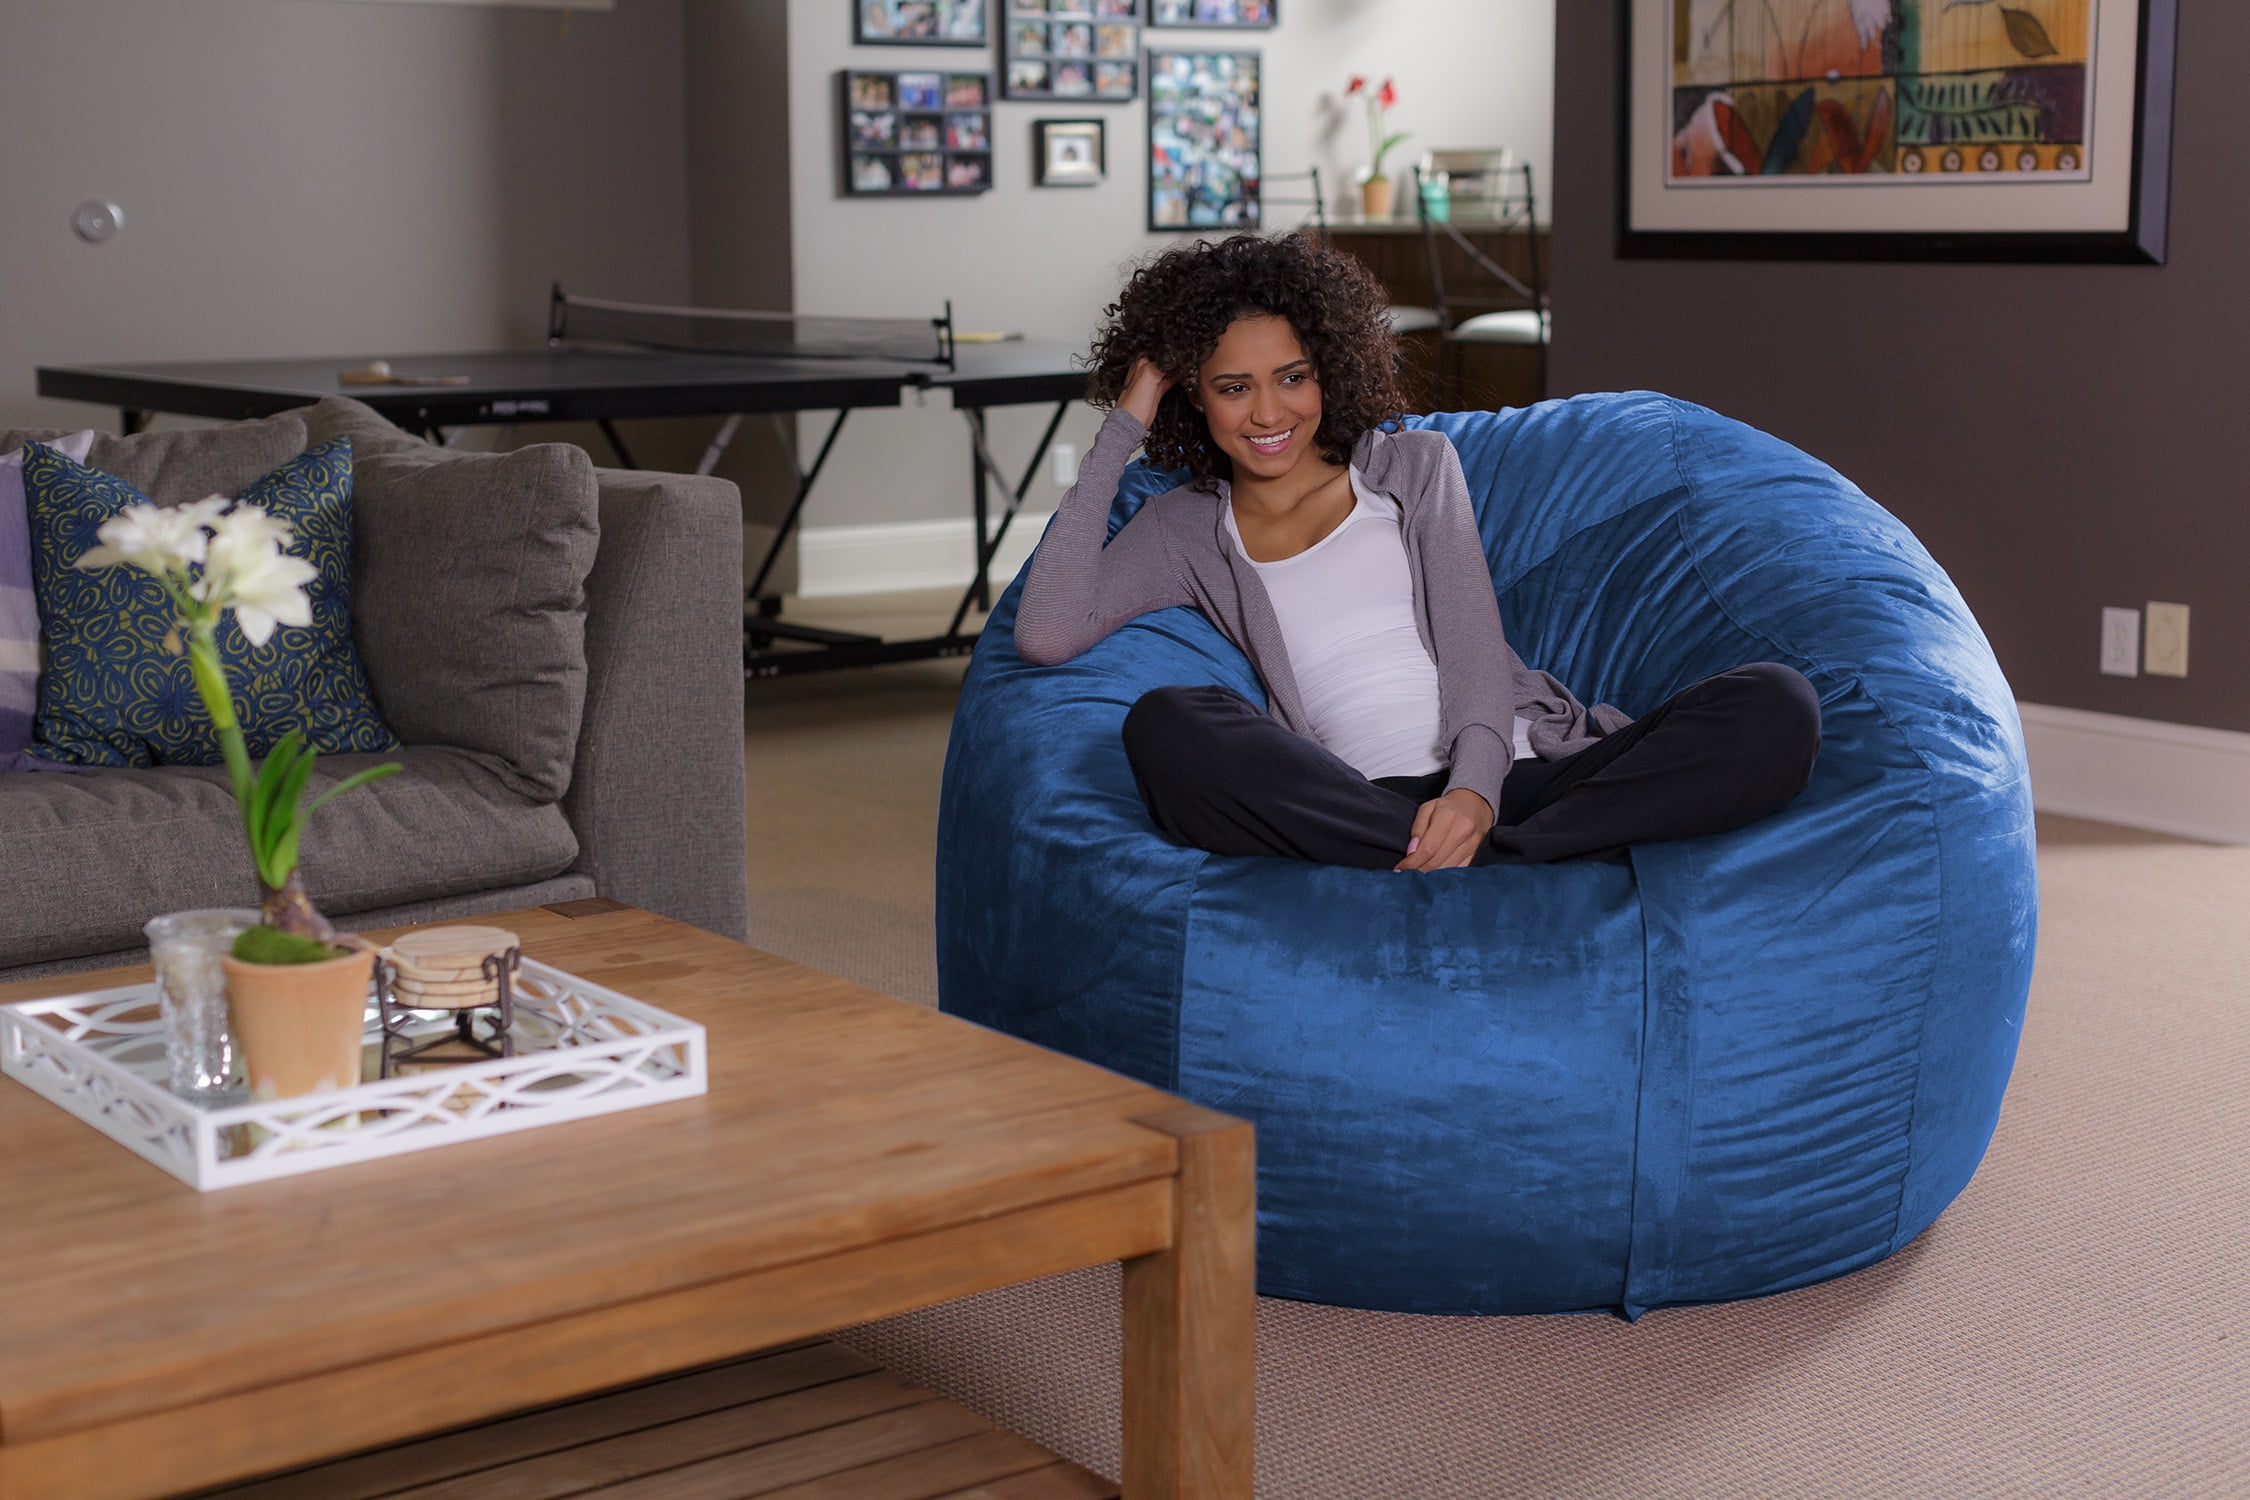 Bean Bag Chair Giant Bean Bag Chairs for Adults 6ft Bean Bag Cover Comfy Large Bean Bag Bed (No Filler, Cover Only) Fluffy Lazy Sofa (Dark Blue)